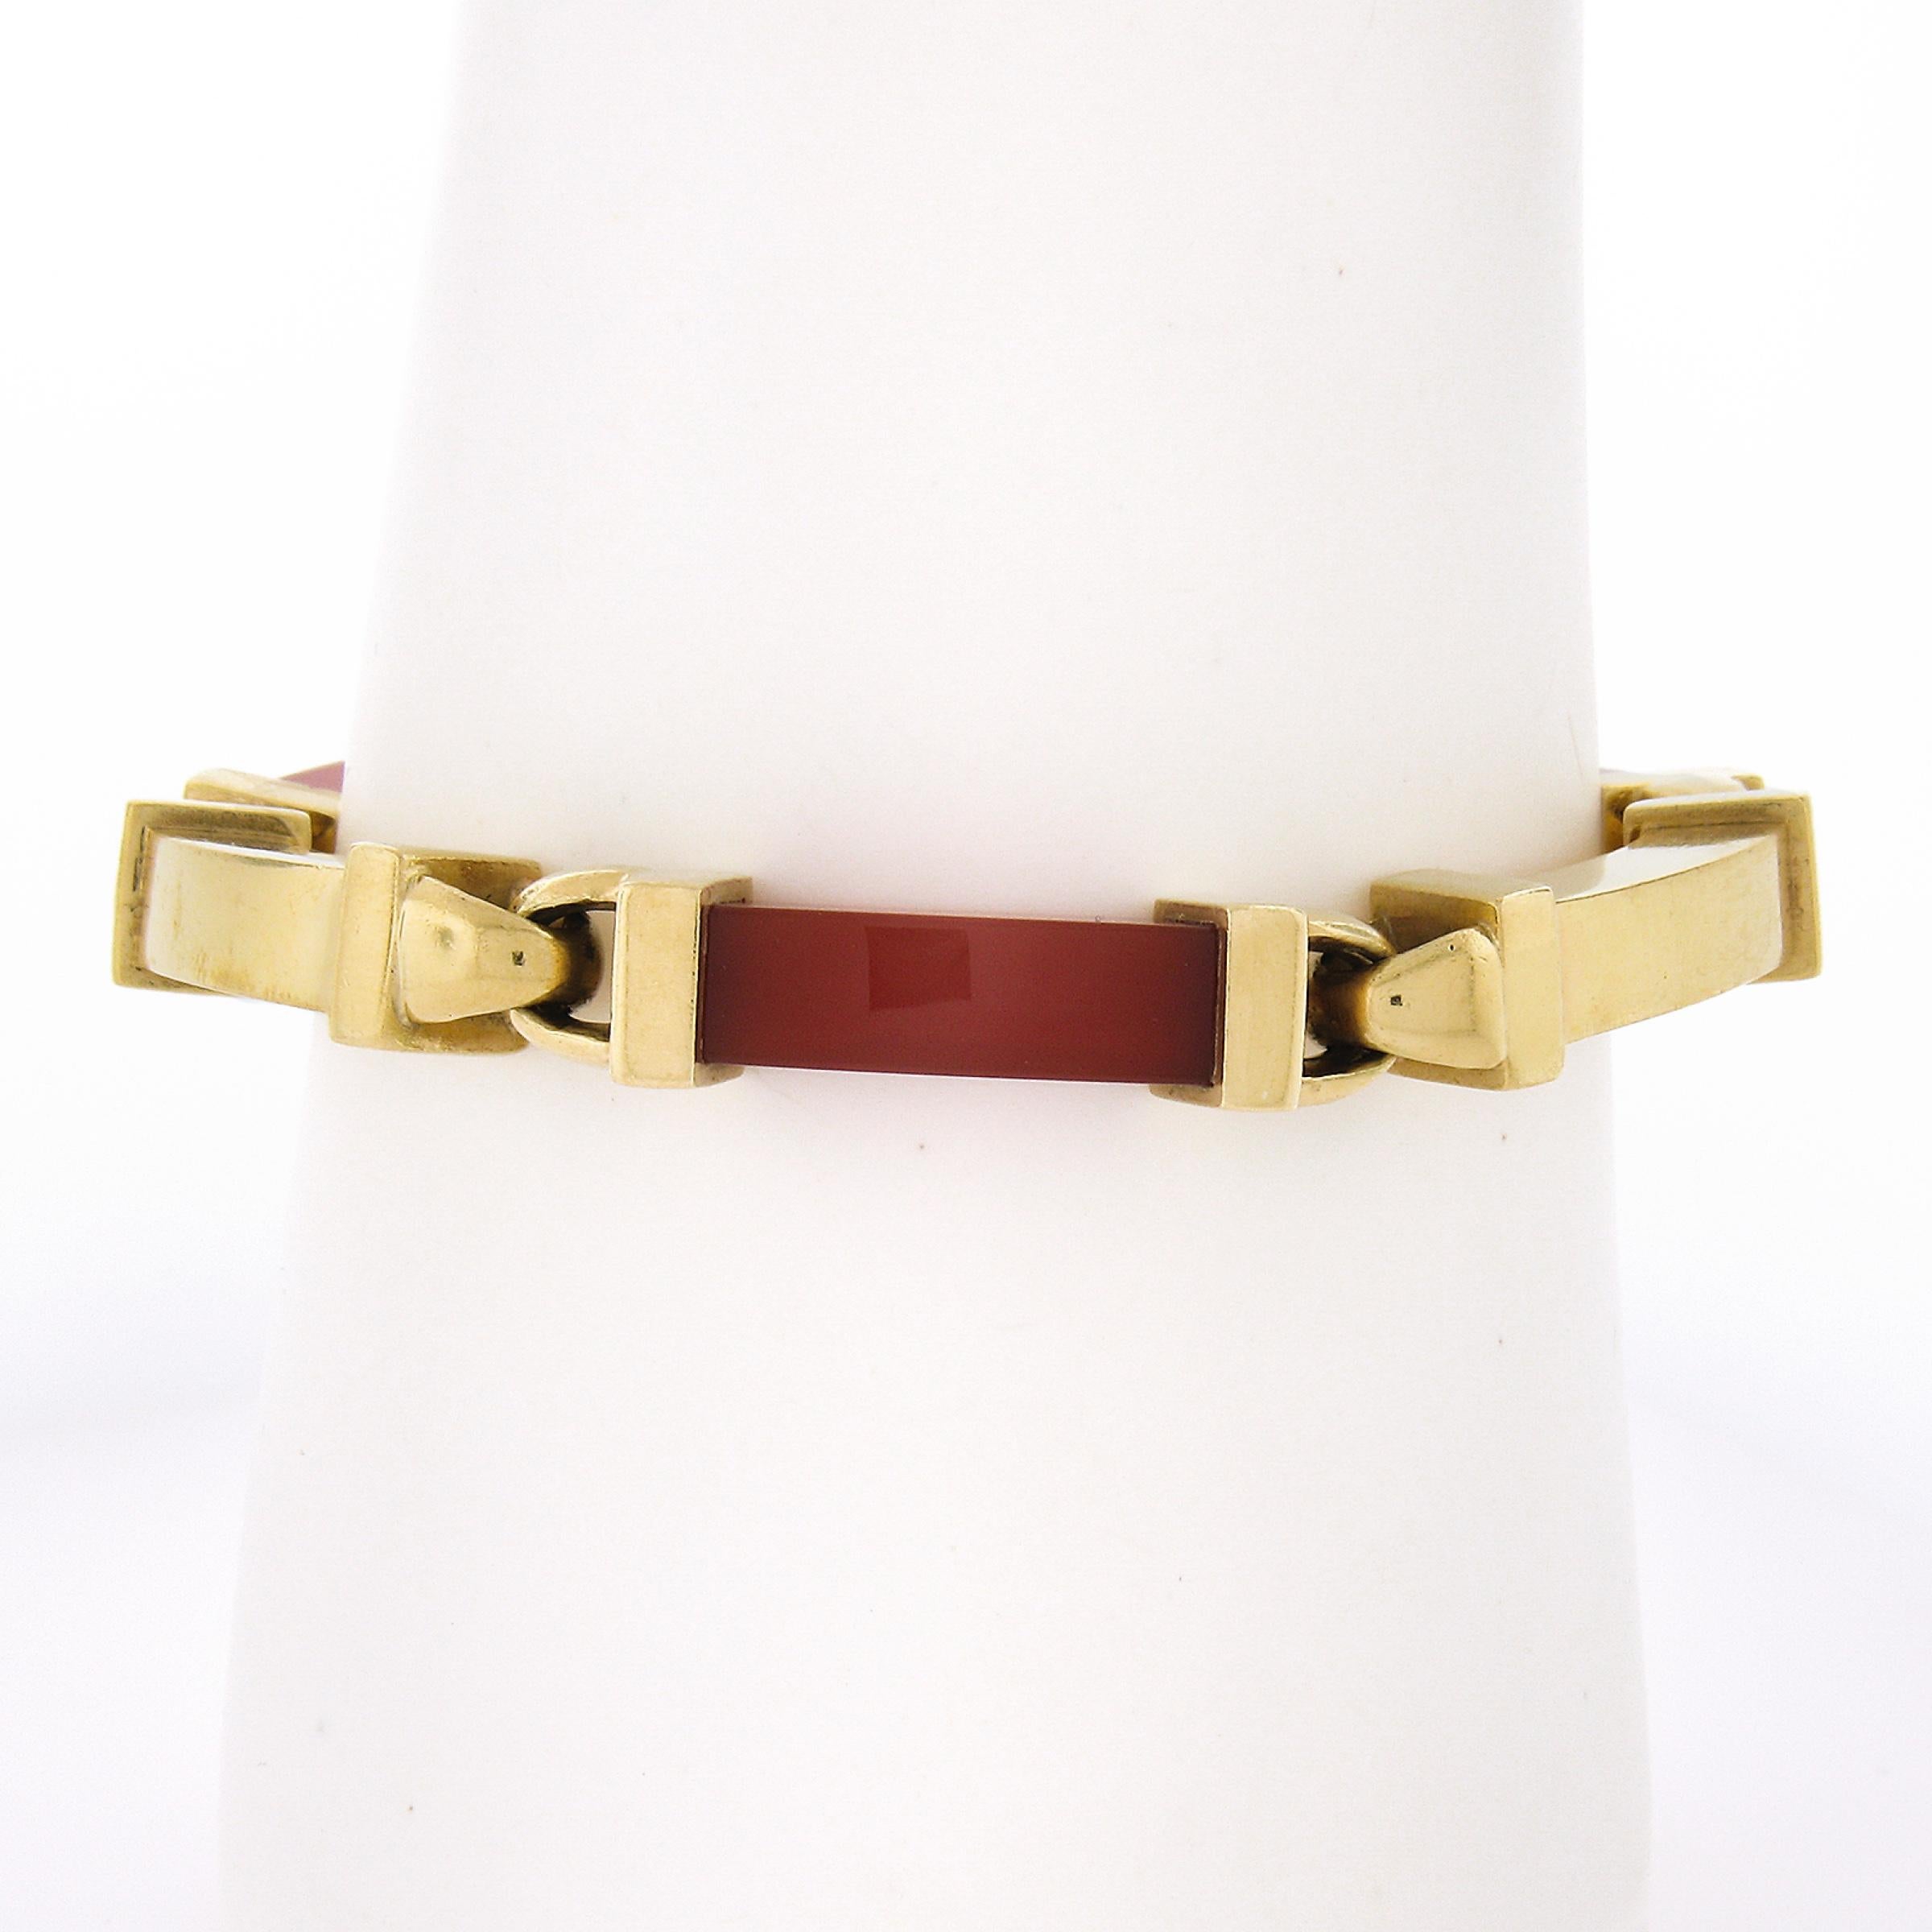 --Stone(s):--
(3) Natural Genuine Carnelians - Curved Rectangular Shape - Cap Set - Nice Orangy Brown Color

Material: Solid 18k Yellow Gold
Weight: 50.39 Grams
Chain Type:	Alternating Carnelian & Gold Links
Chain Length:	Comfortably fits up to 7